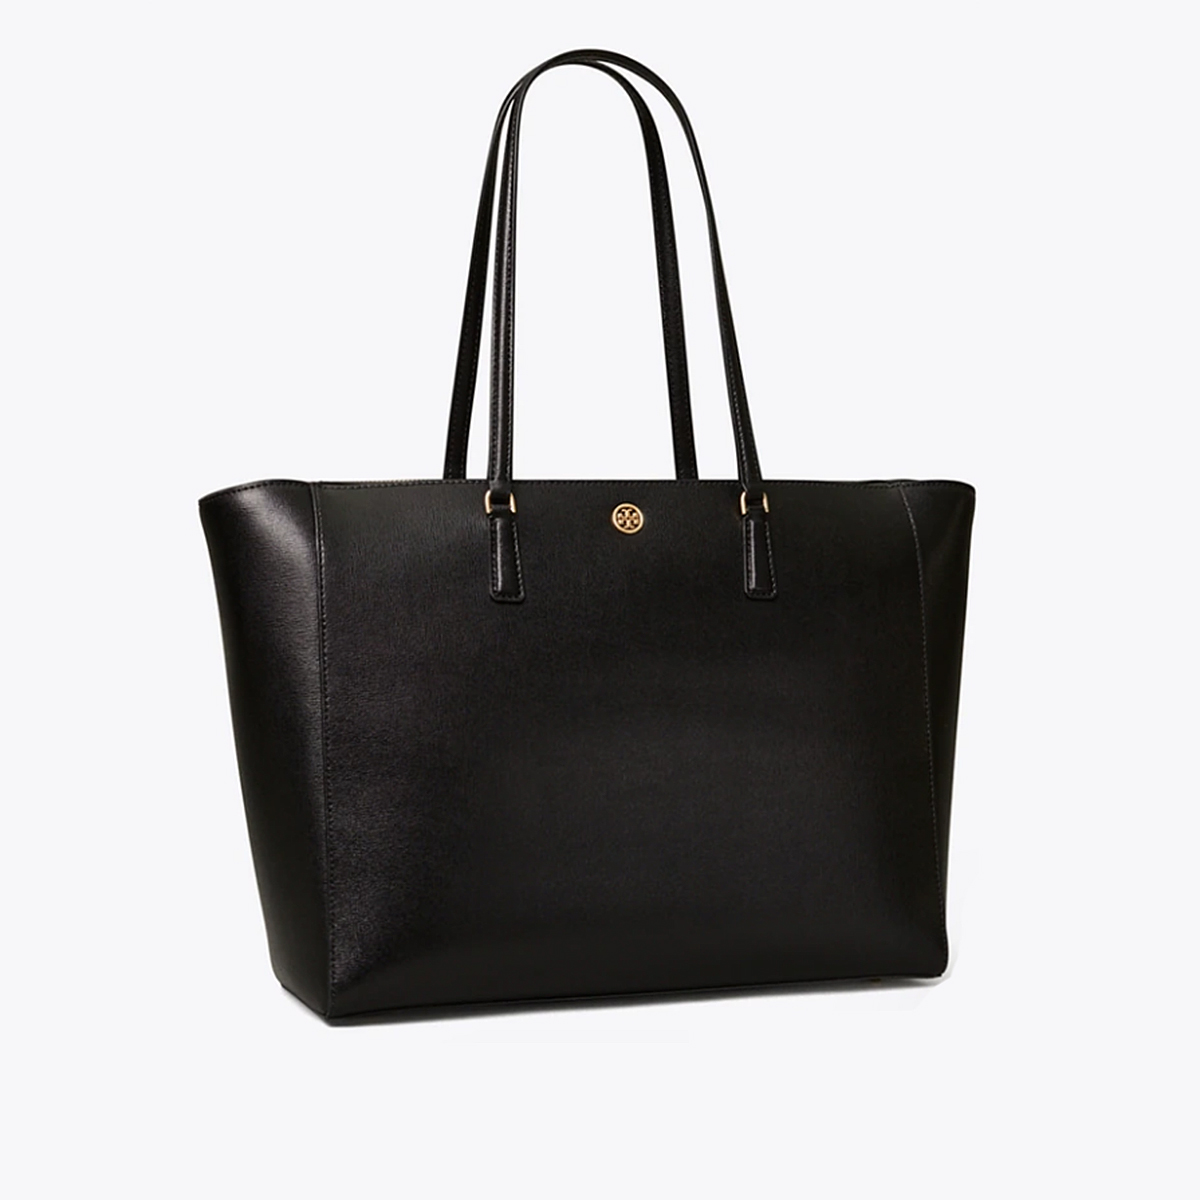 Shop This Tory Burch Tote Bag — On Sale for $100 Off!